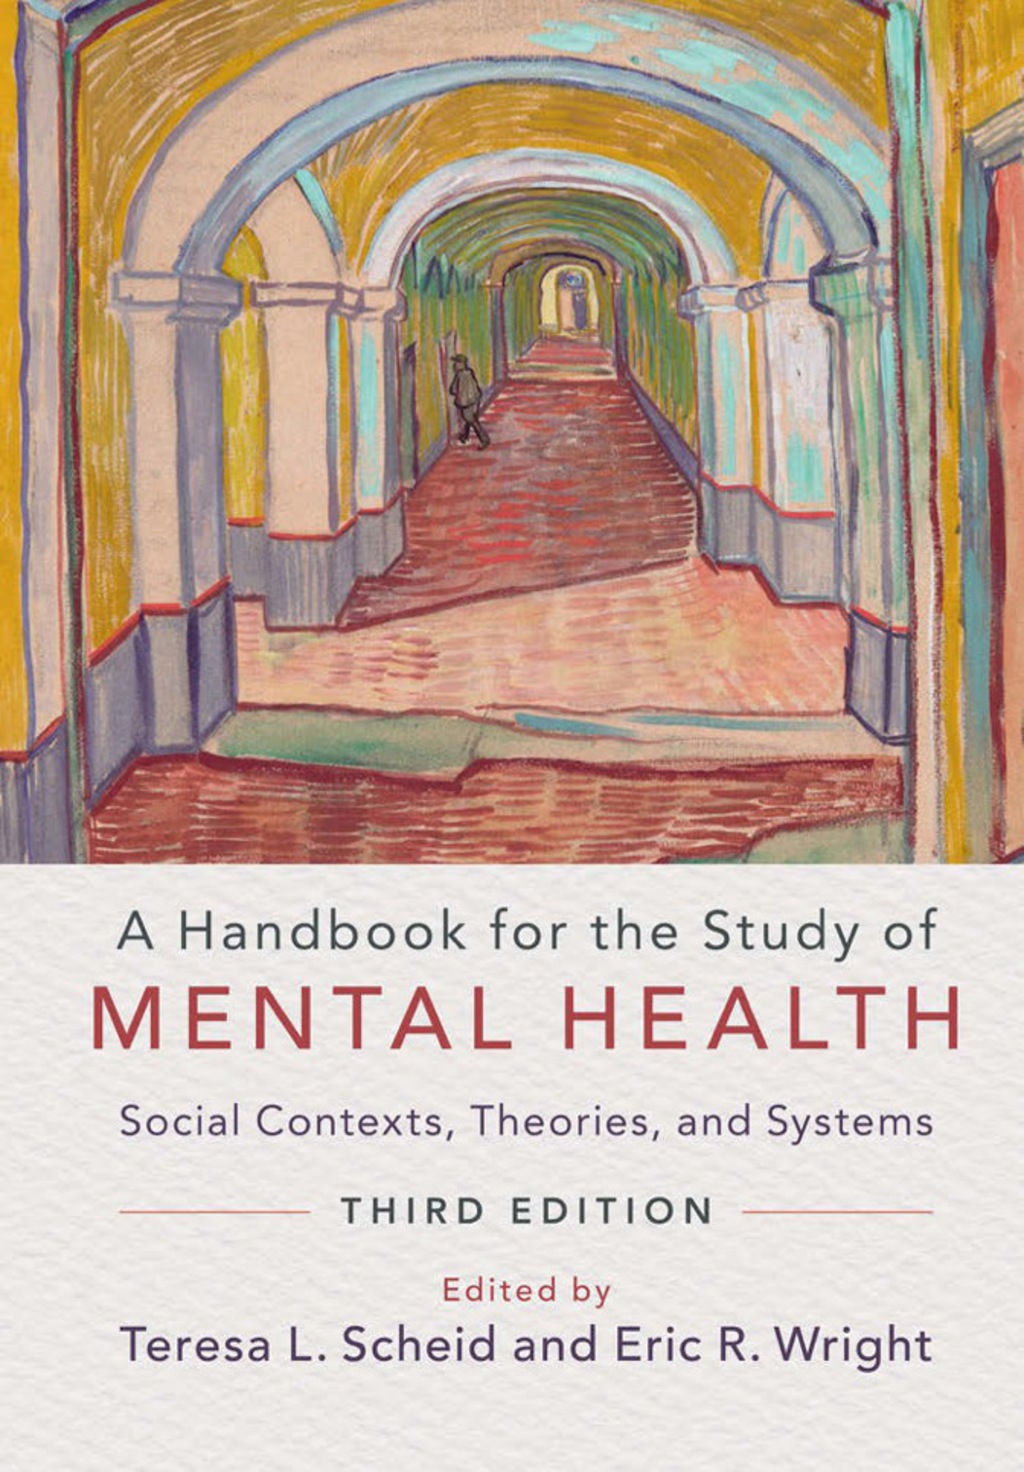 A Handbook for the Study of Mental Health - 3rd Edition (eBook)